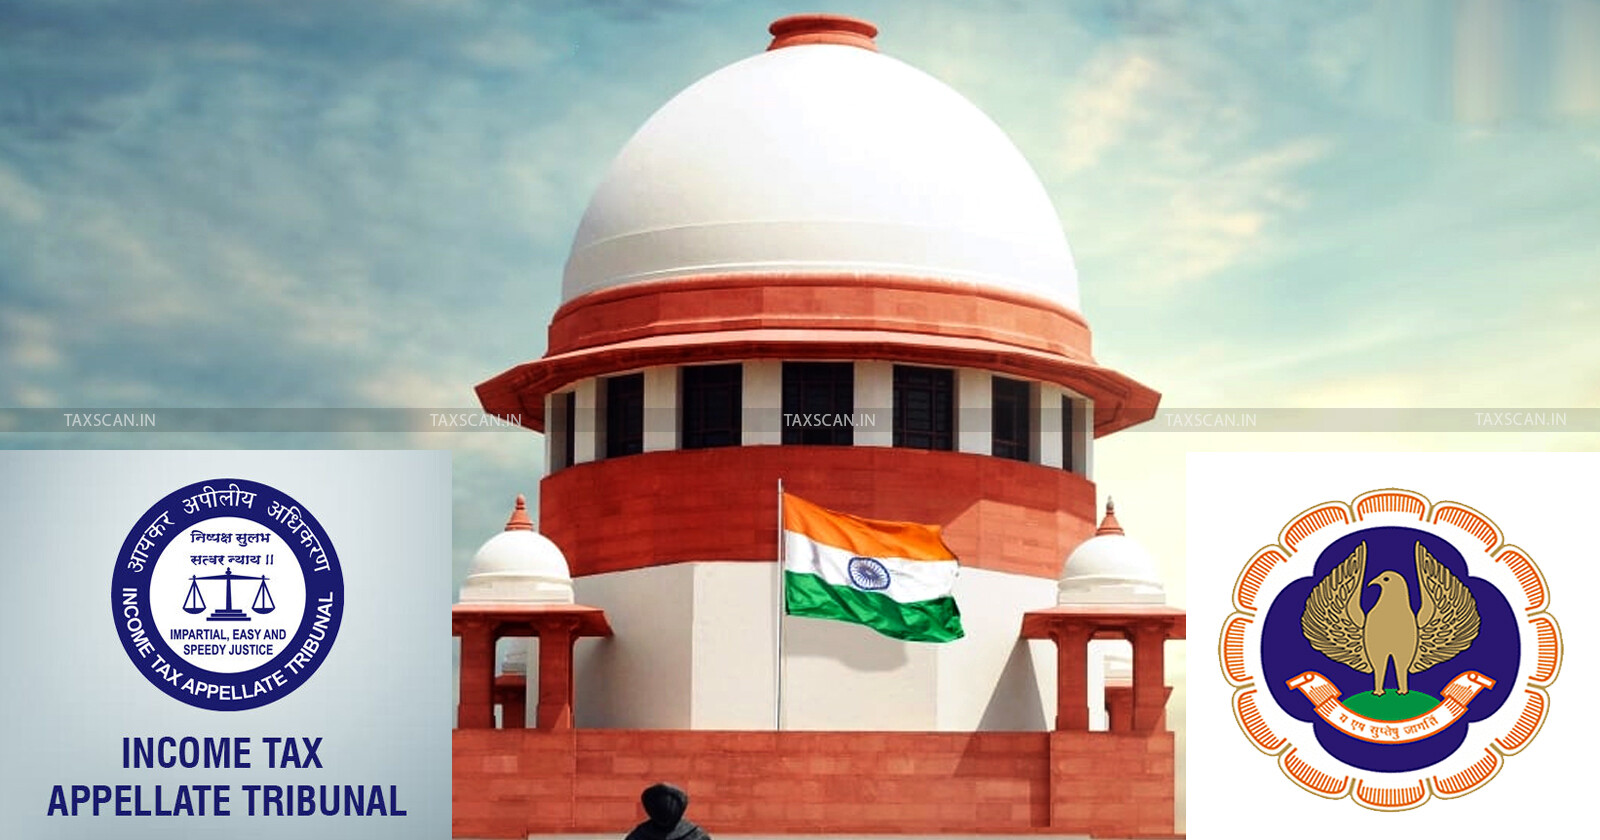 ICAI - impleaded - ITAT - Appointment -Case- Supreme- Court - taxscan